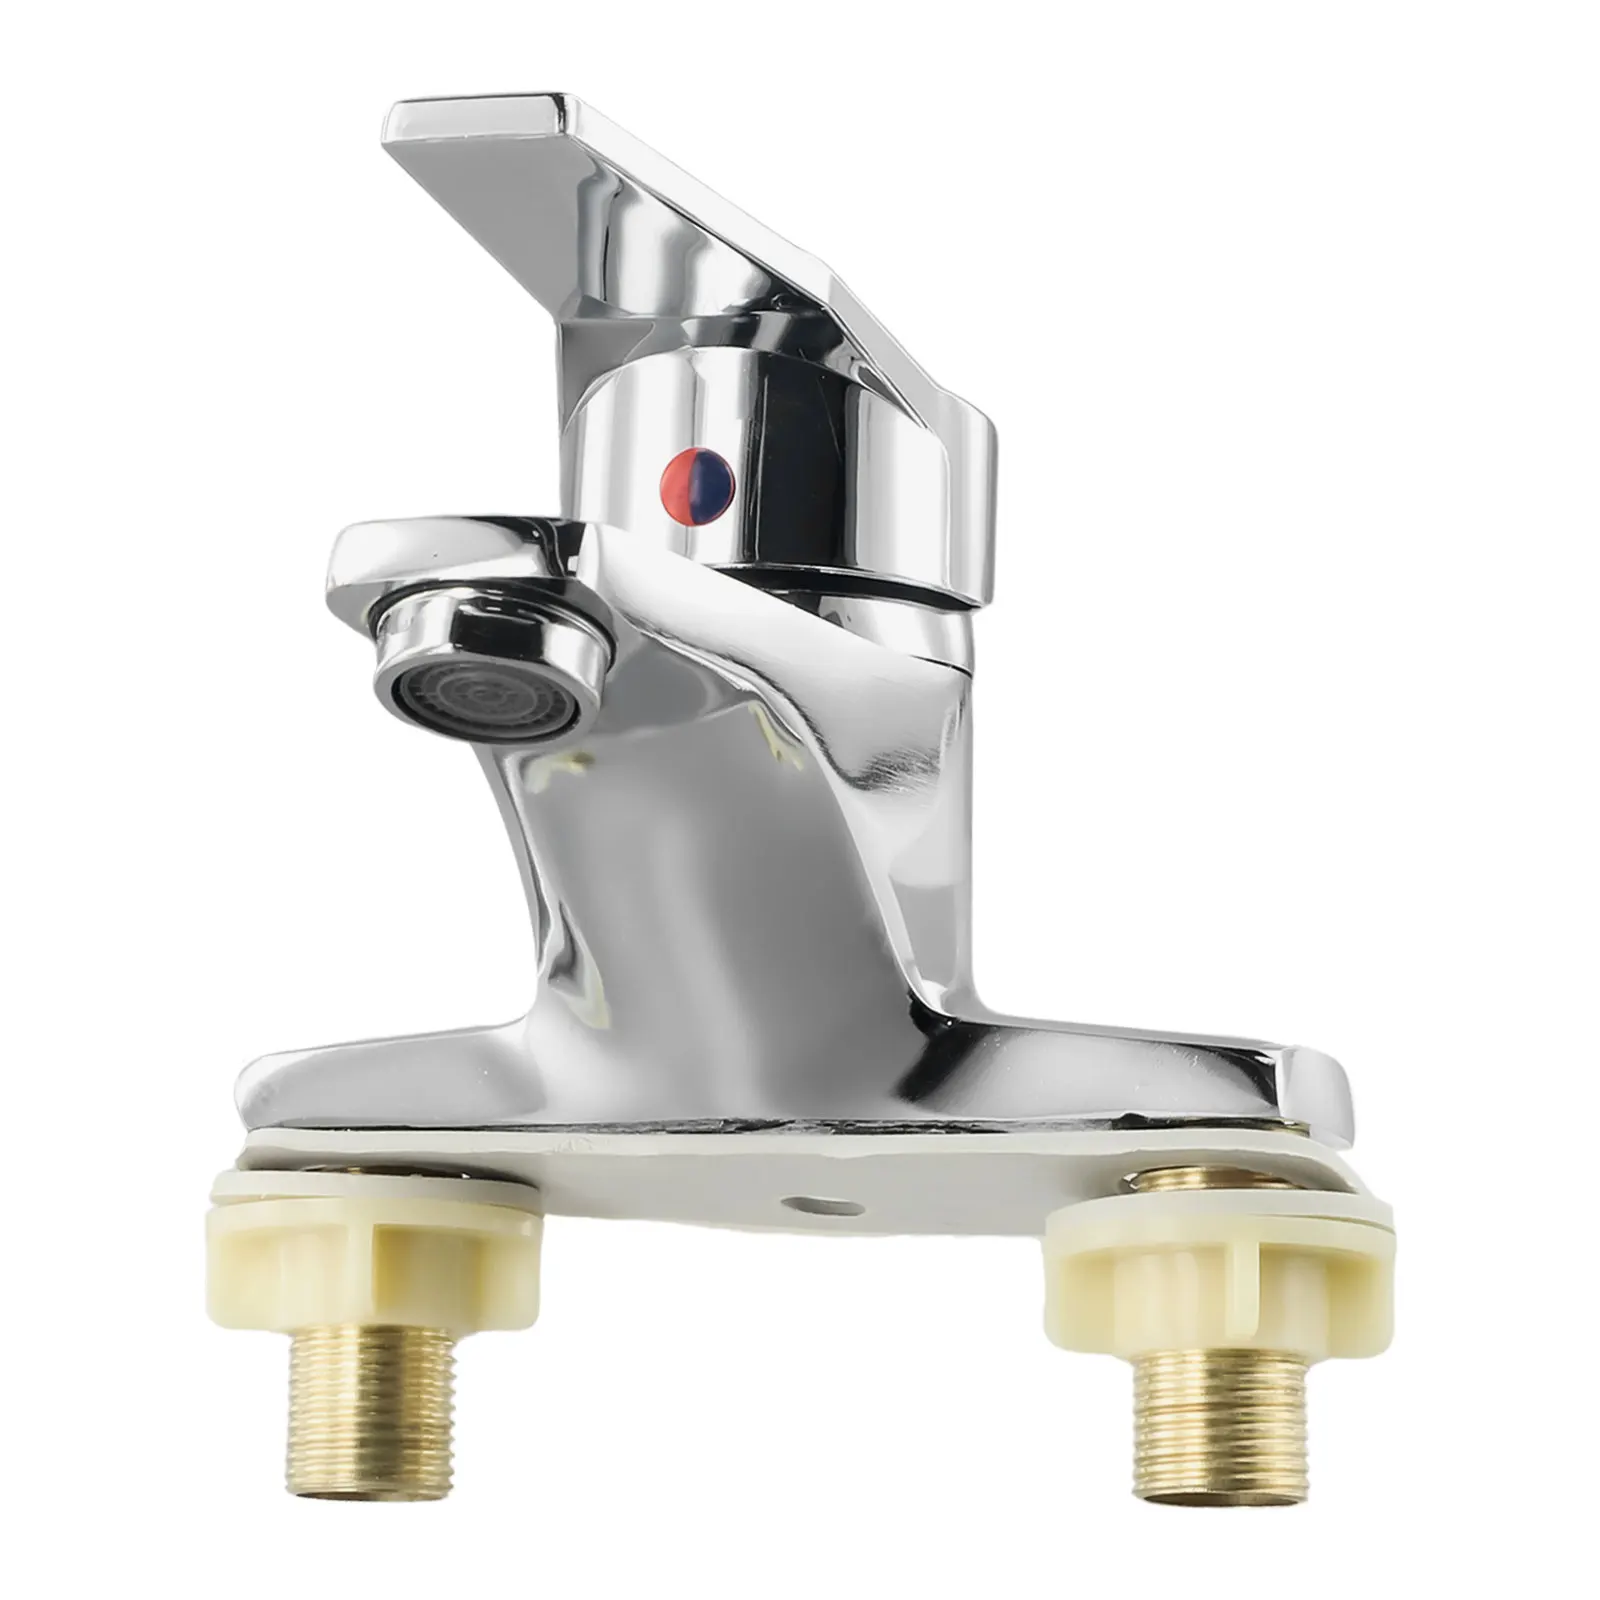 

Bathroom Mixer Tap Hot And Cold Bathroom Mixer Mixing Valve Wall Mounted Bathtub Faucet Shower Faucets Sink Spray Shower Tap